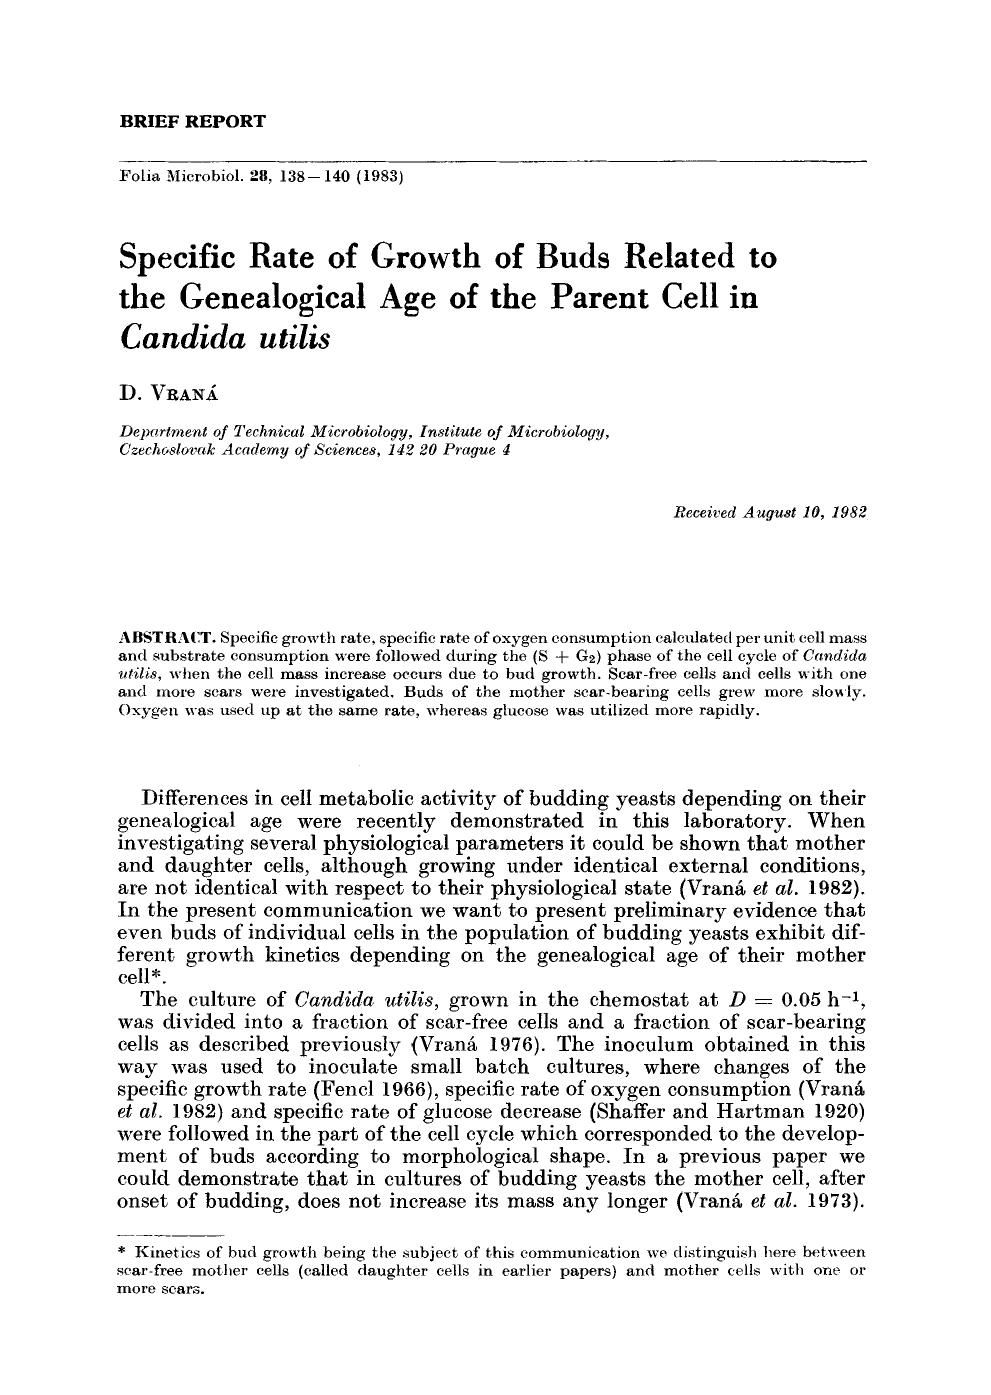 Specific rate of growth of buds related to the genealogical age of the parent cell in <Emphasis Type="Italic">Candida utilis <Emphasis> by Unknown